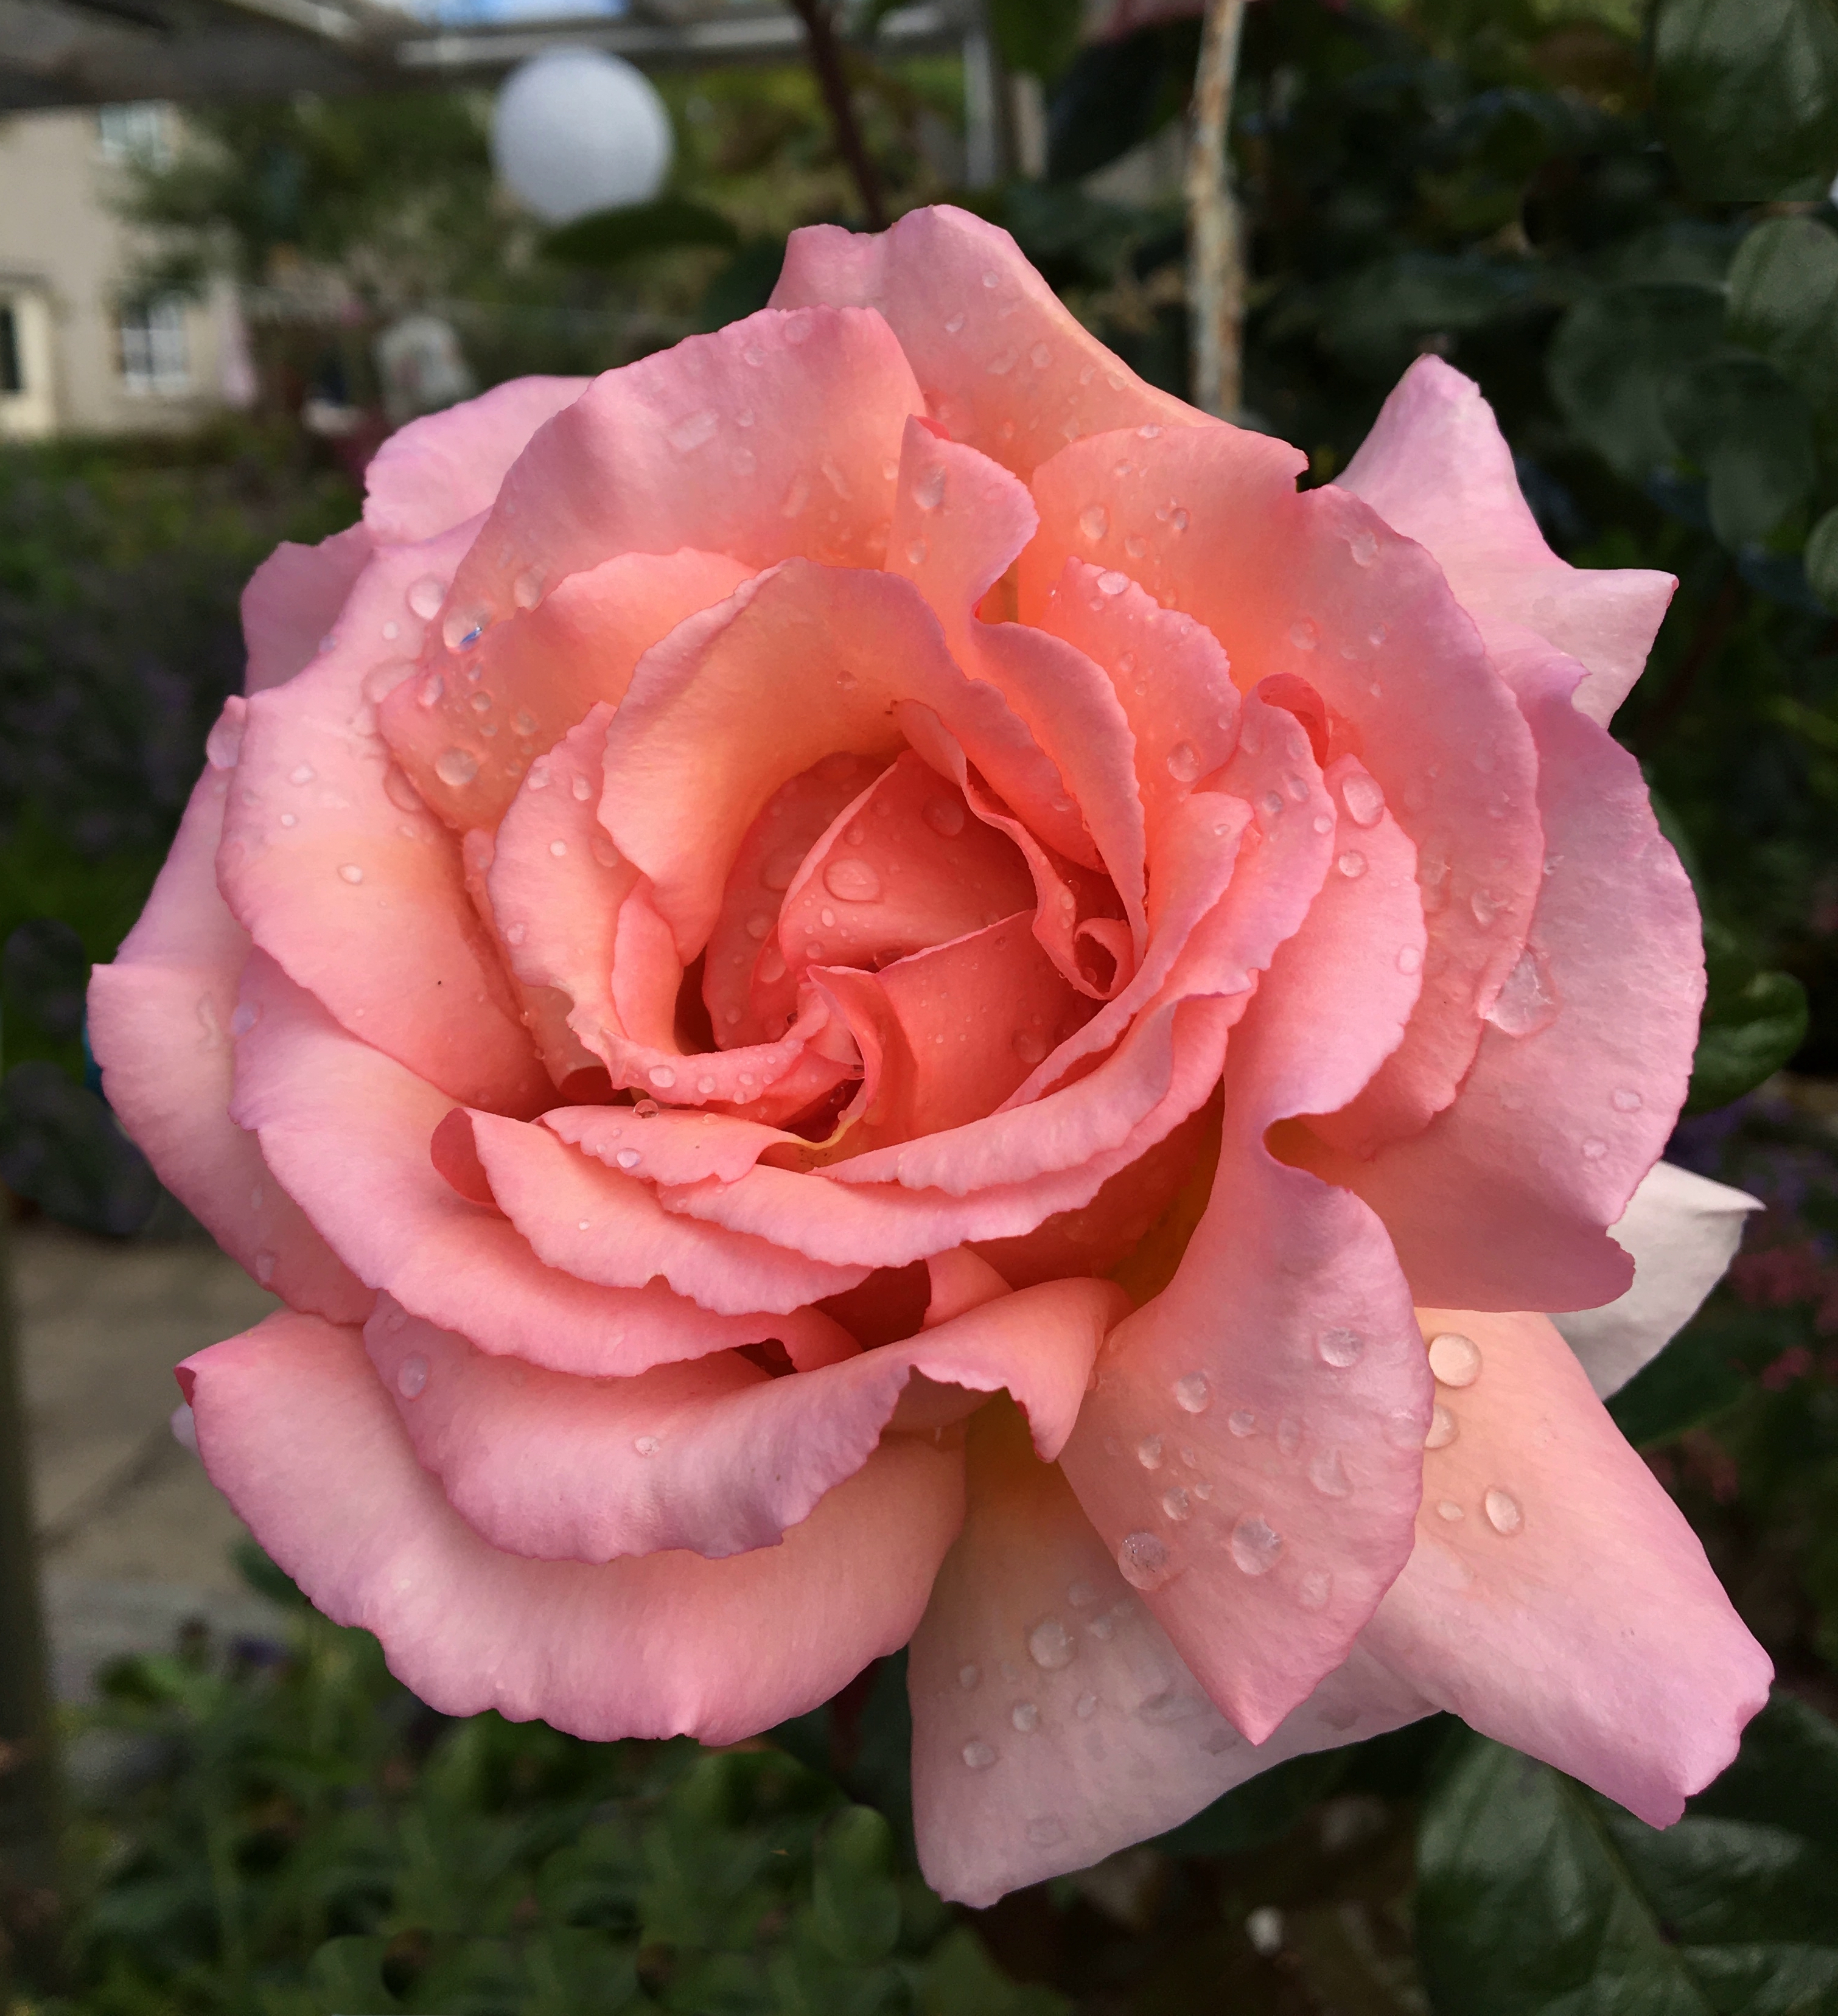 Copyright image: Astoundingly beautiful fragrant rose 'Compassion'.